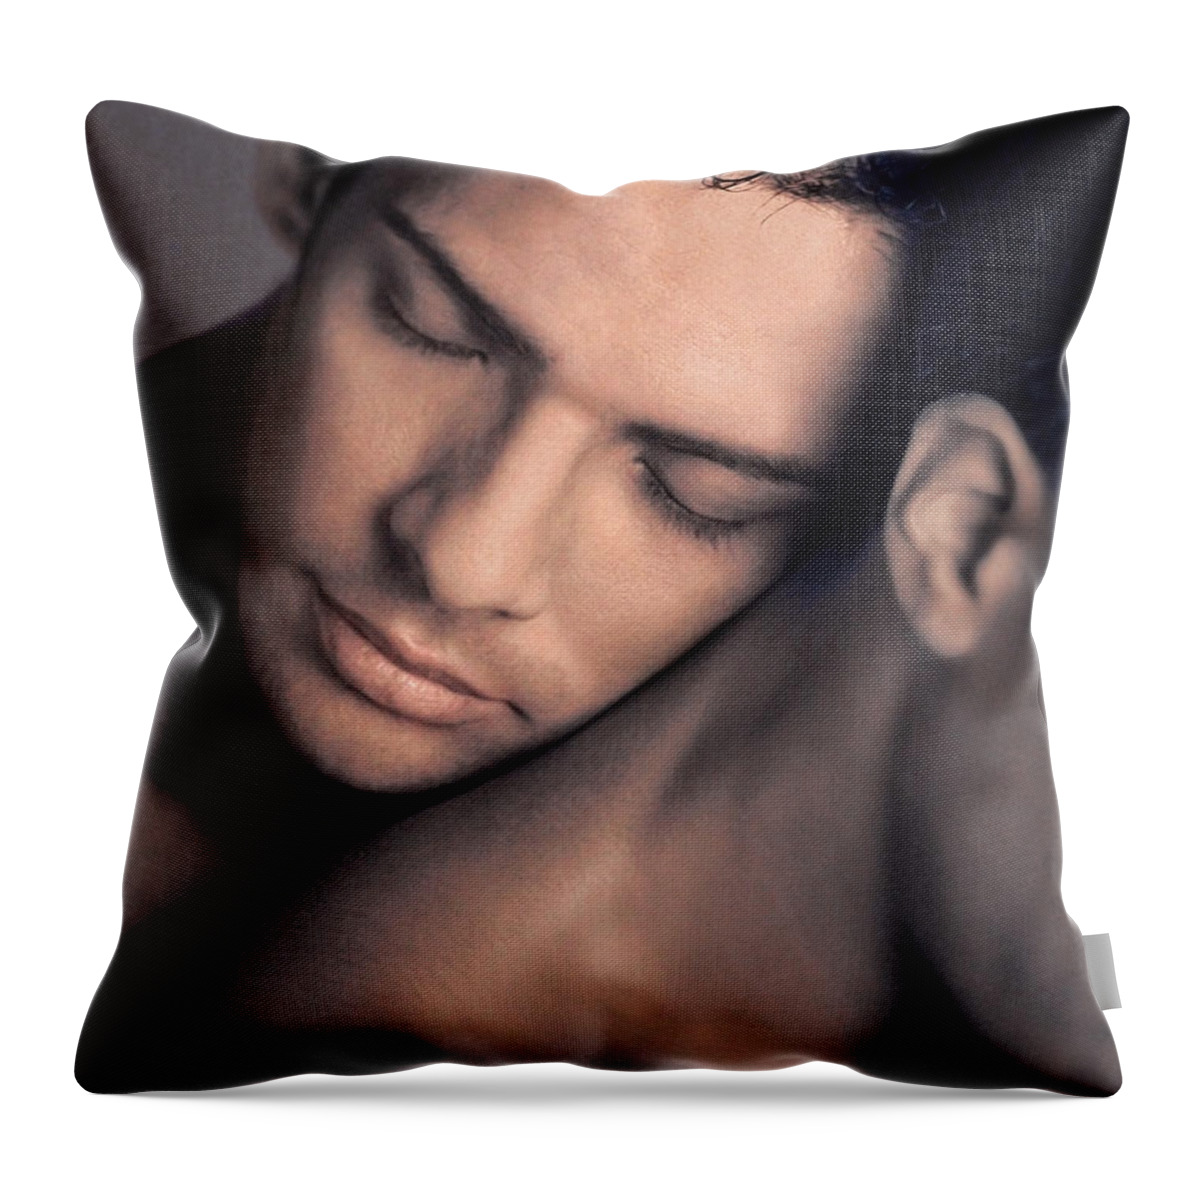 25-29 Years Throw Pillow featuring the photograph Two Naked Young Men Embracing, Close-up by Ed Freeman